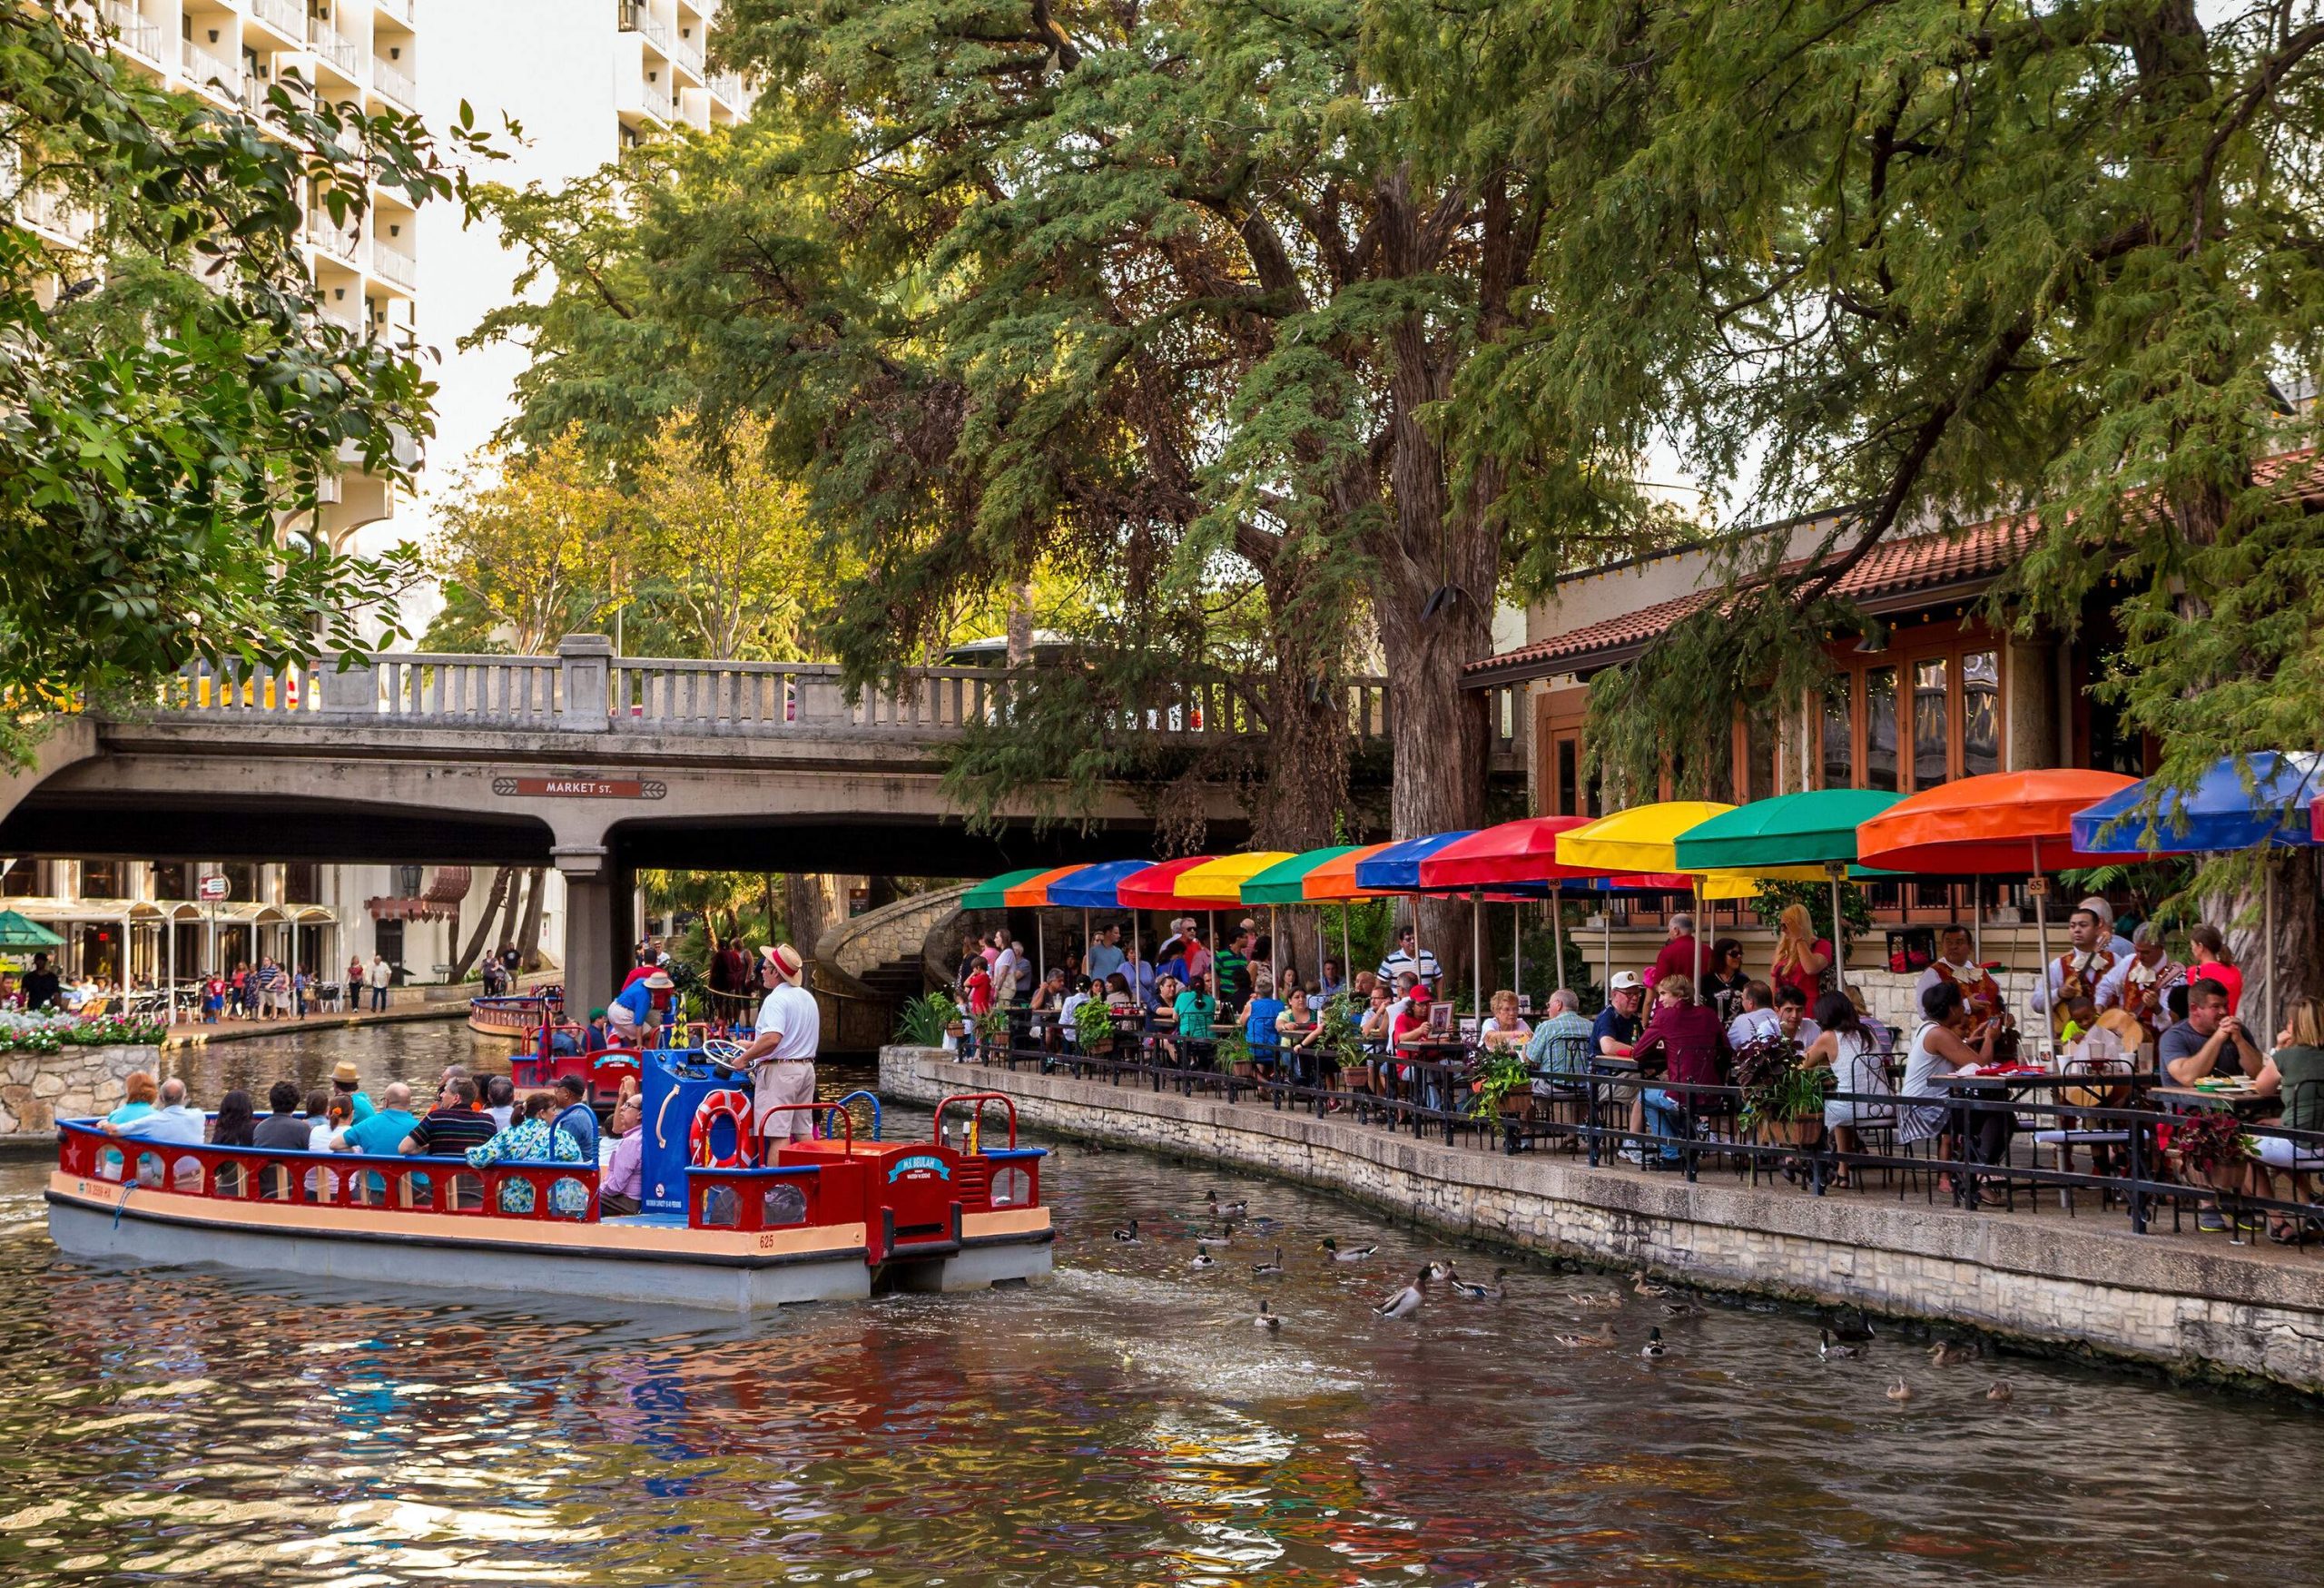 A vibrant and colourful passenger boat gracefully cruises beneath a charming bridge, while the lively riverwalk bustles with outdoor dining options, where a crowd of people enjoy the ambiance, all set against a breathtaking canopy of trees.